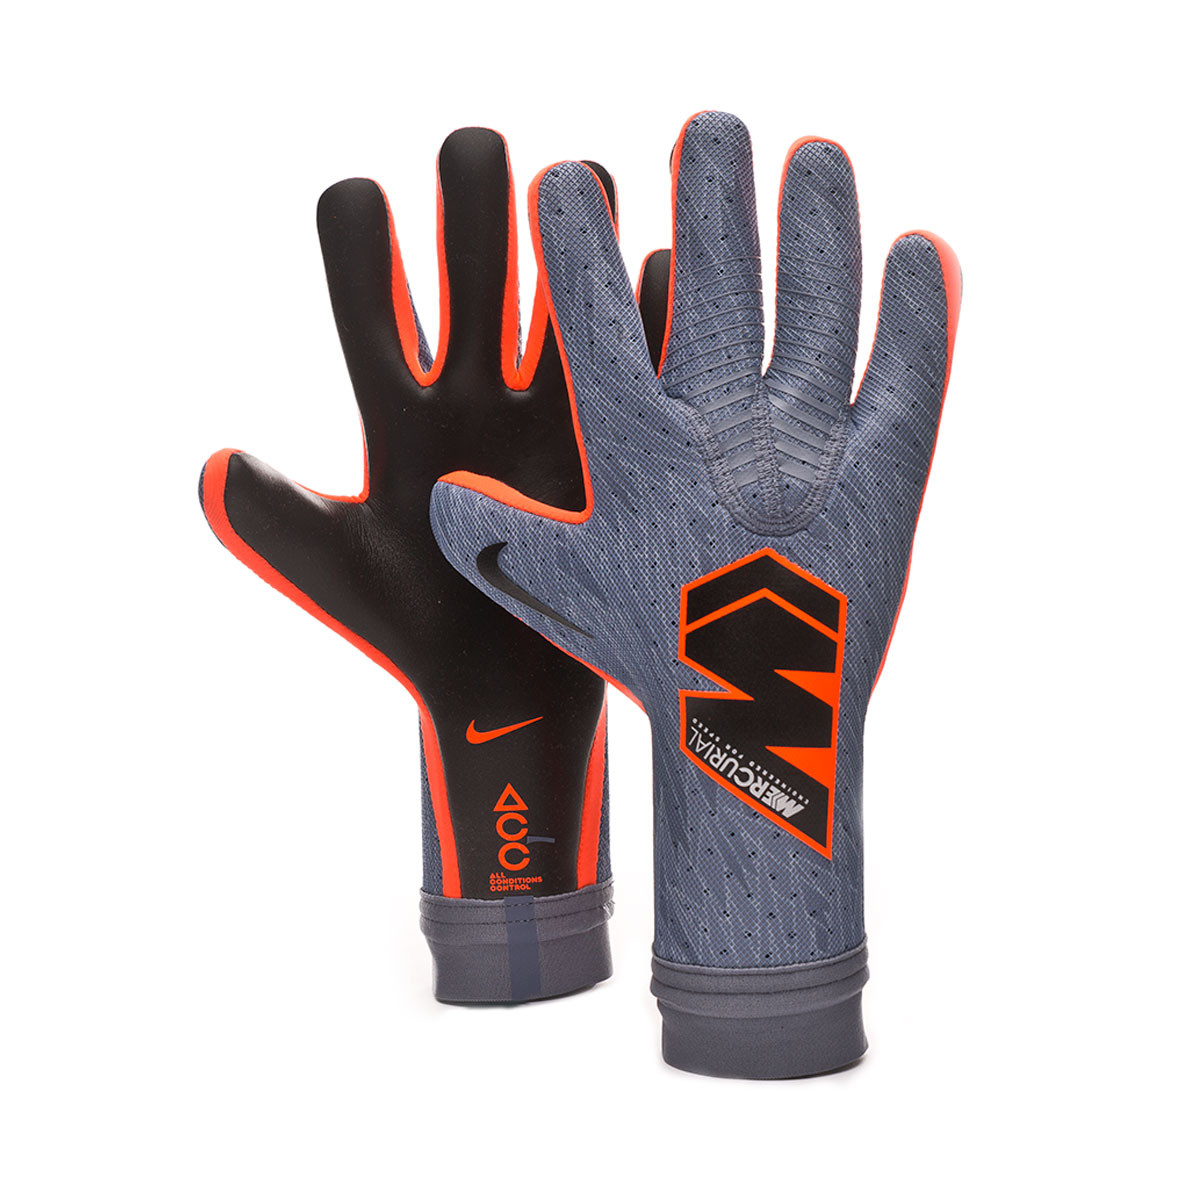 nike mercurial touch elite gloves price